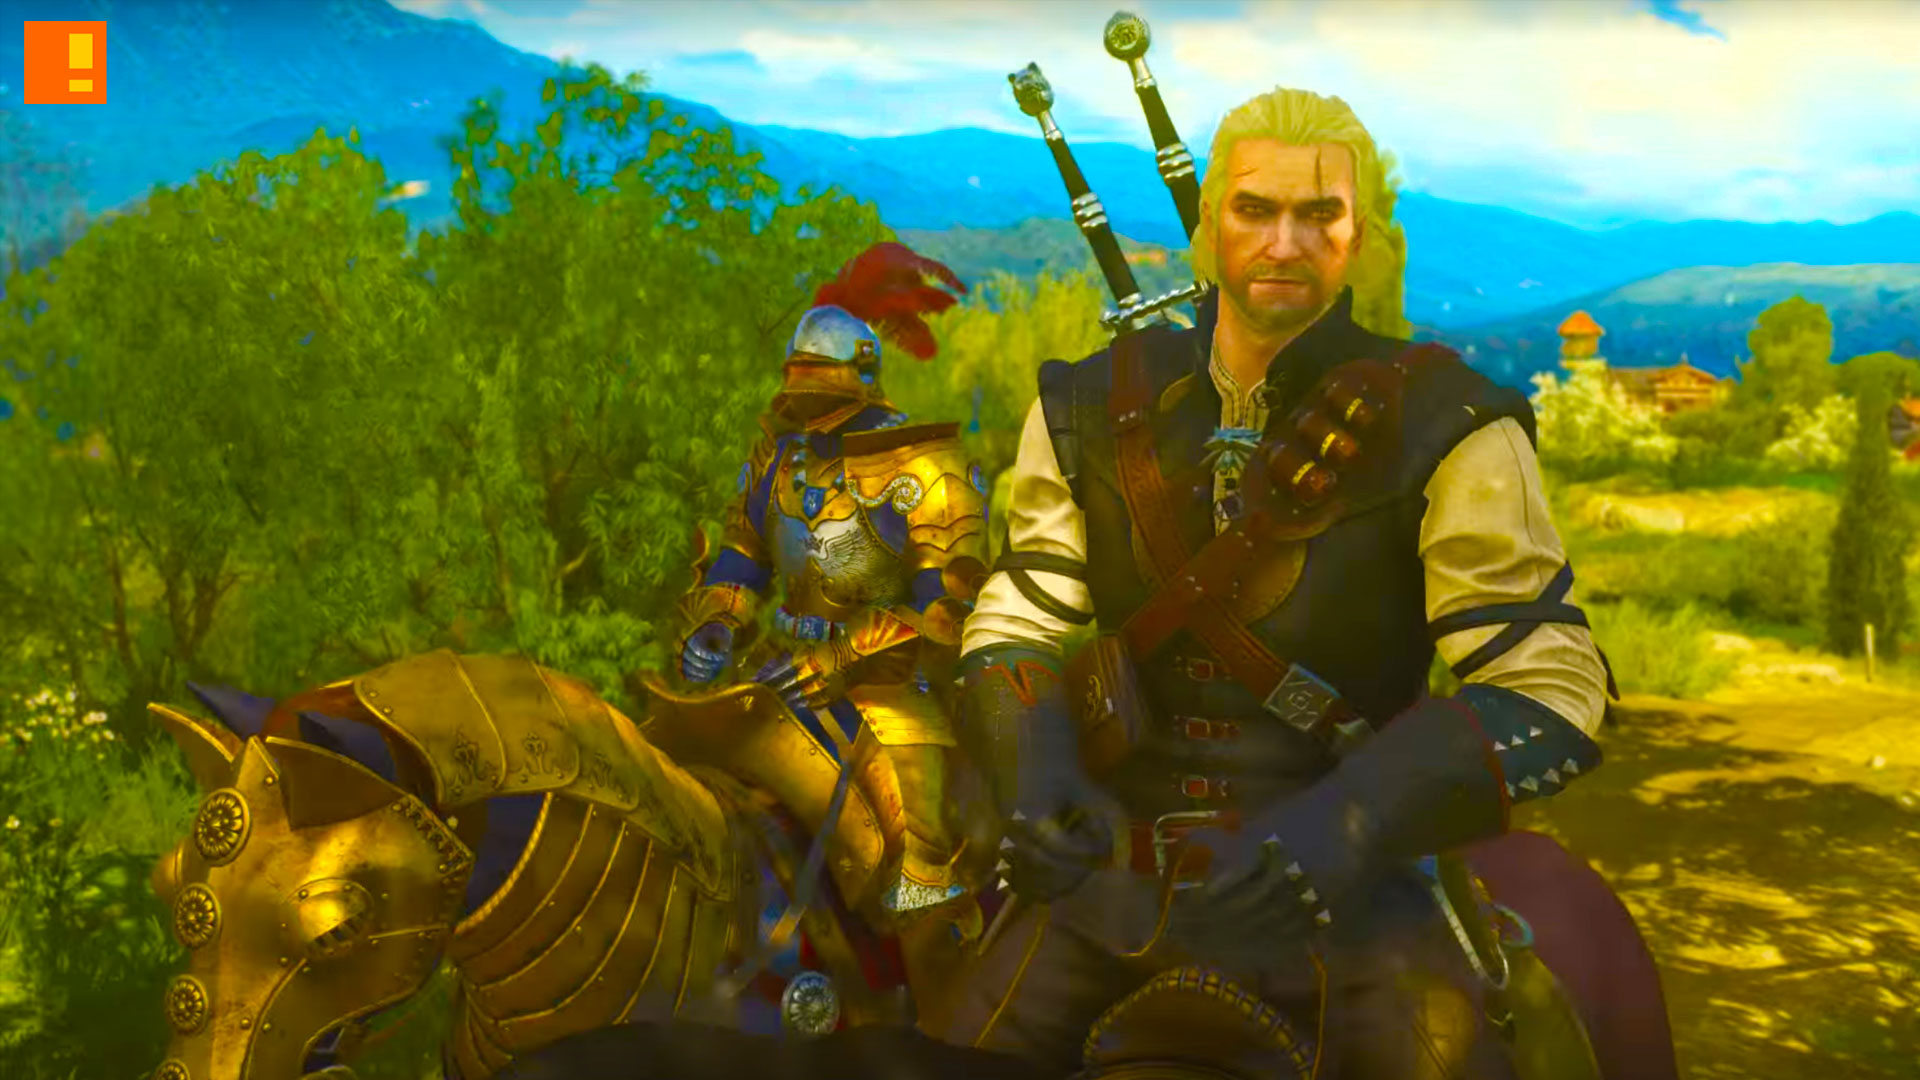 the witcher 3, the witcher, blood and wine, dlc, launch trailer,toussaint, geralt , geralt of rivia, dlc, the action pixel, entertainment on tap